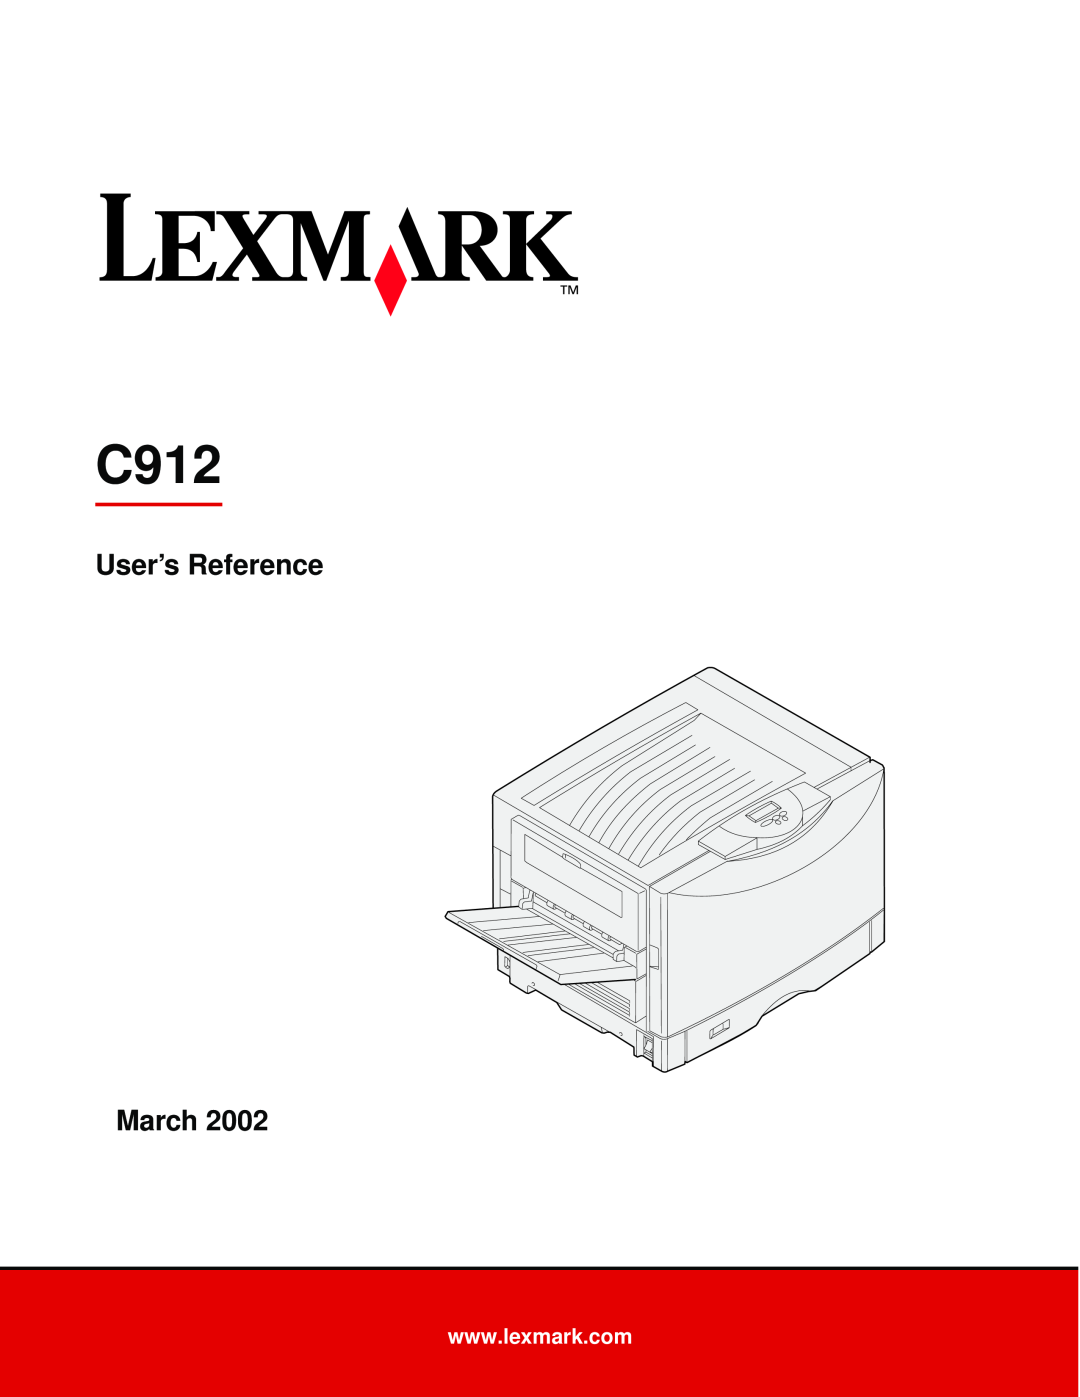 Lexmark manual C912, User’s Reference March 